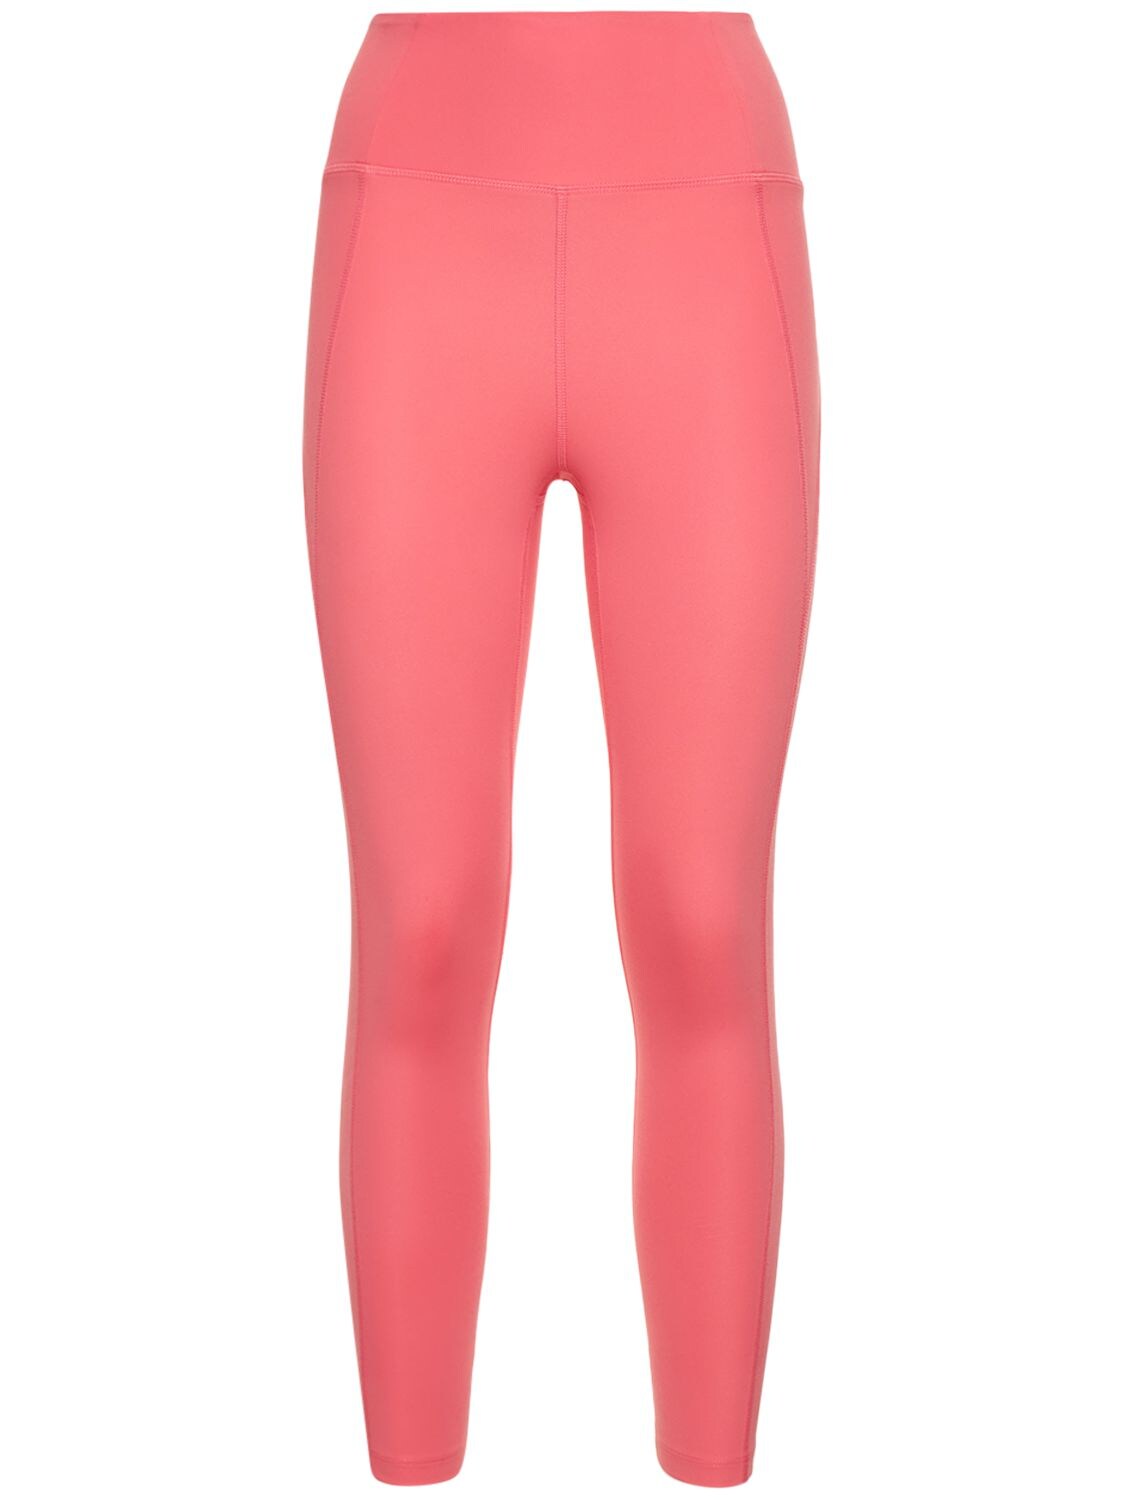 GIRLFRIEND COLLECTIVE HIGH RISE 7/8 COMPRESSION LEGGINGS